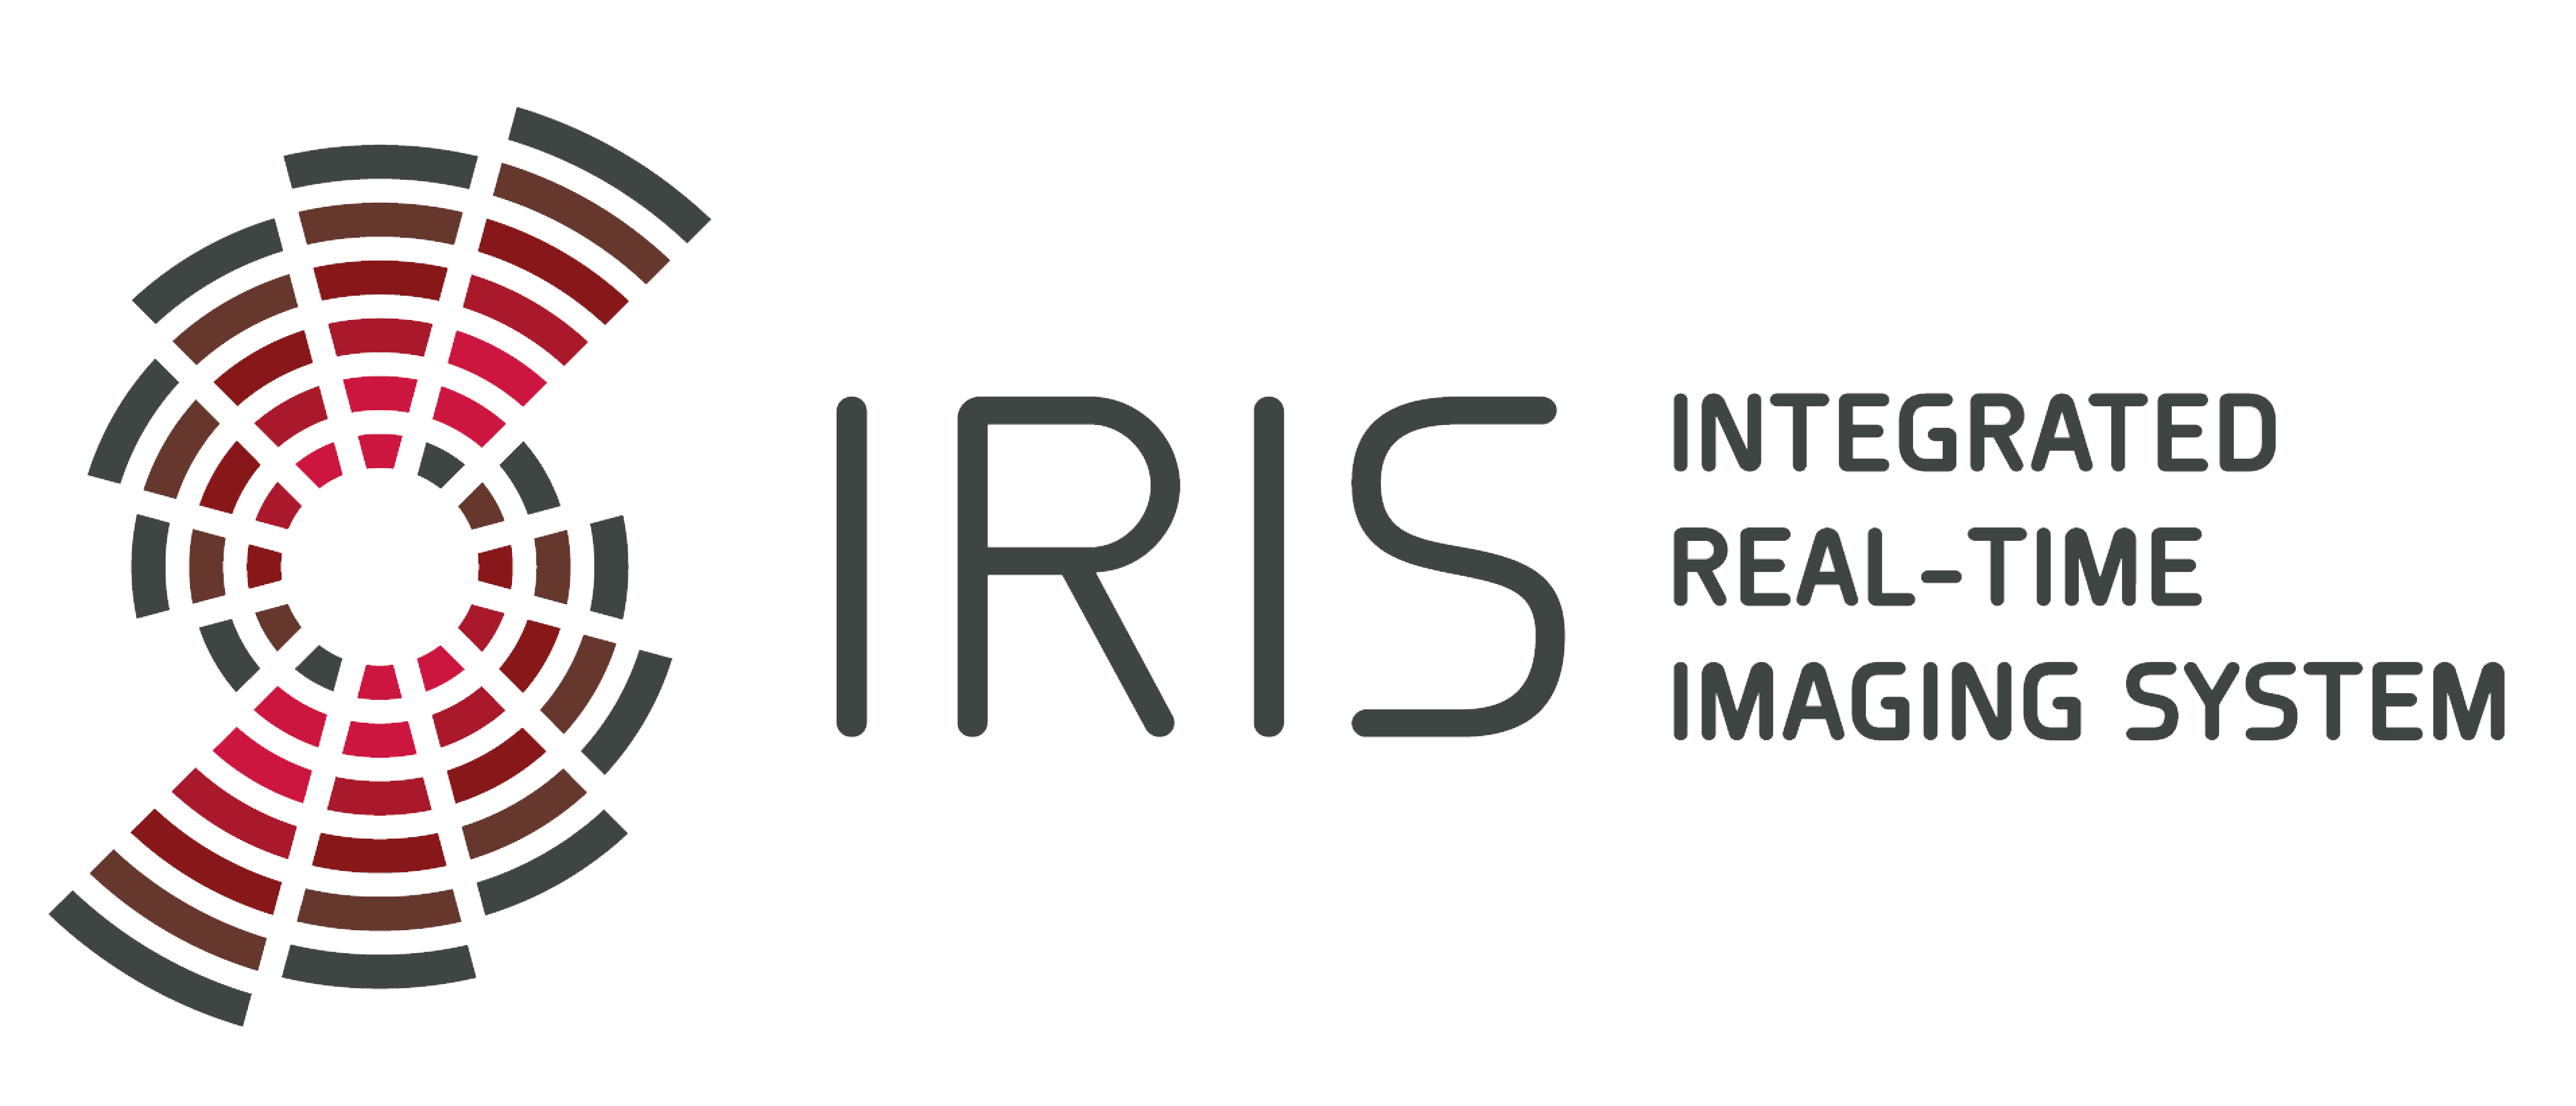 IRIS Integrated Real-Time Imaging System